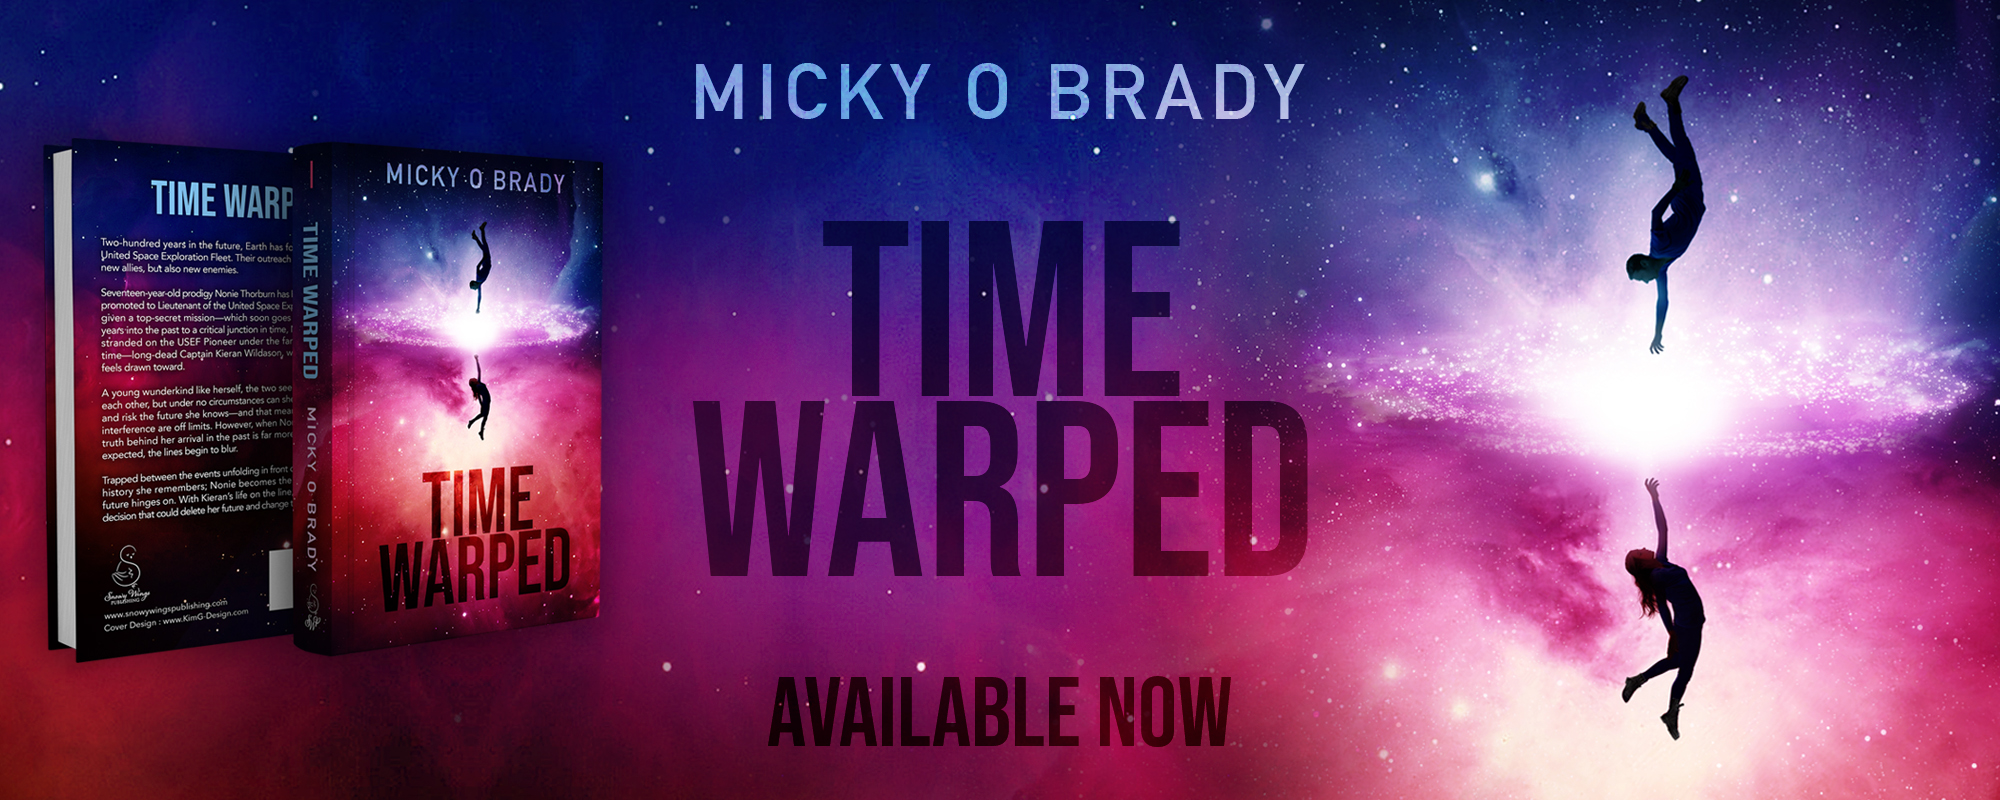 Time Warped by Micky O'Brady, available now